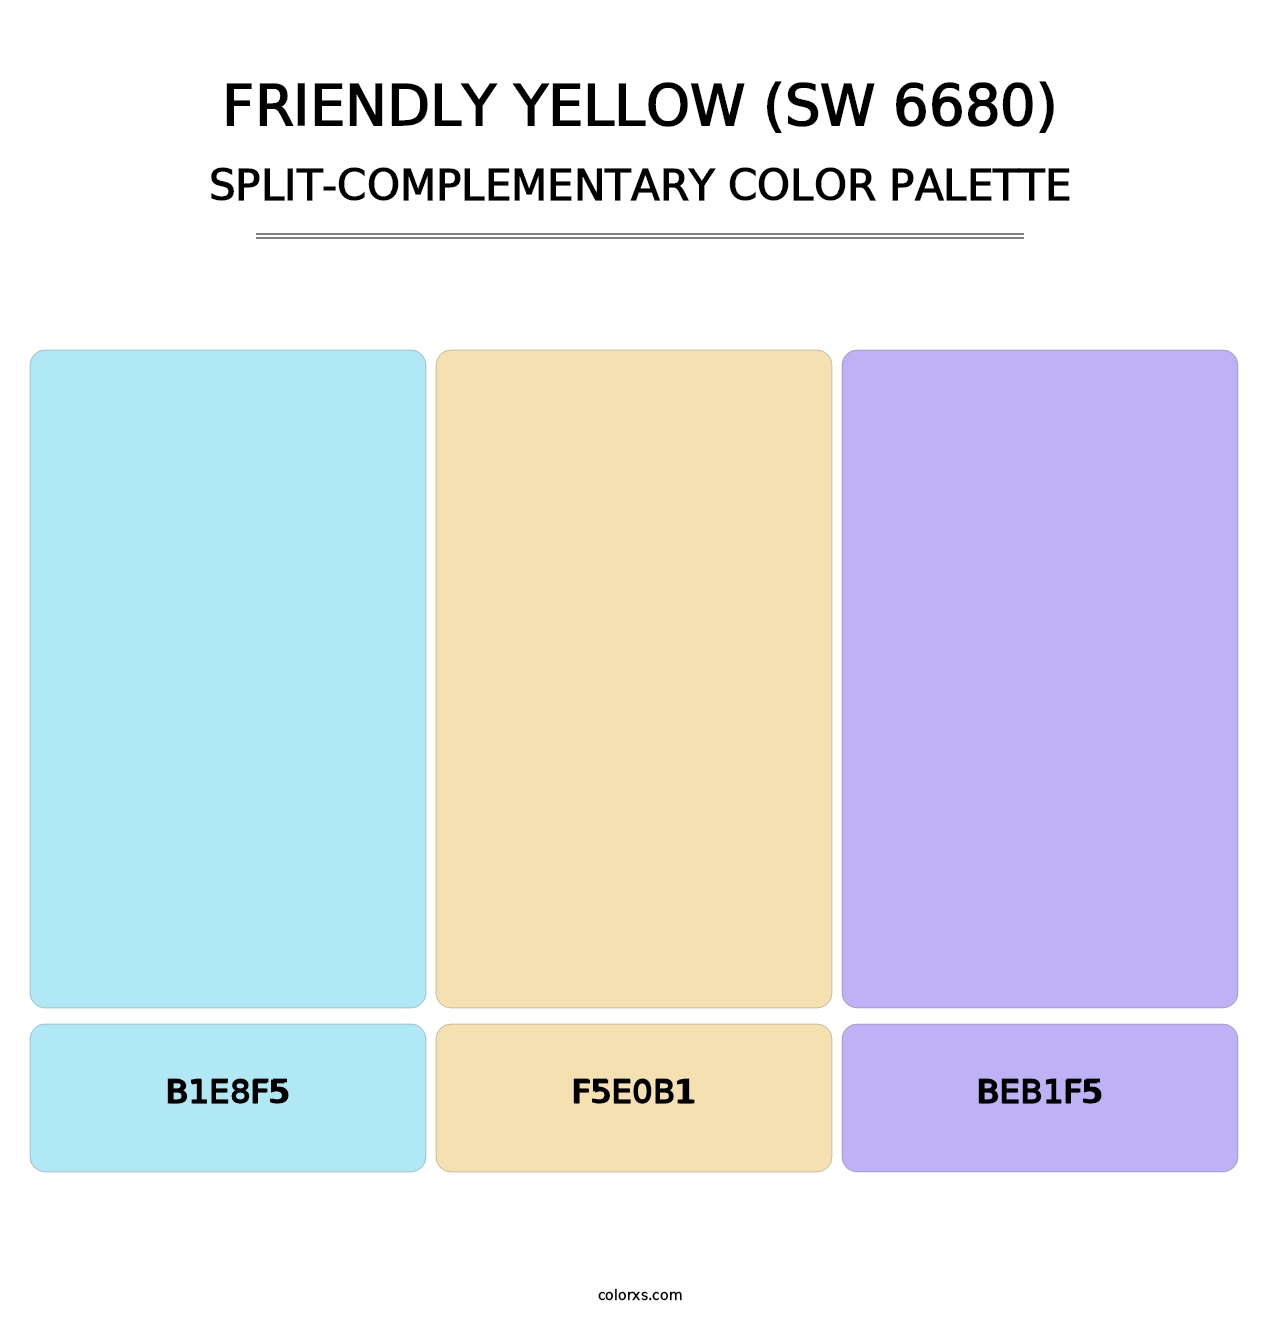 Friendly Yellow (SW 6680) - Split-Complementary Color Palette